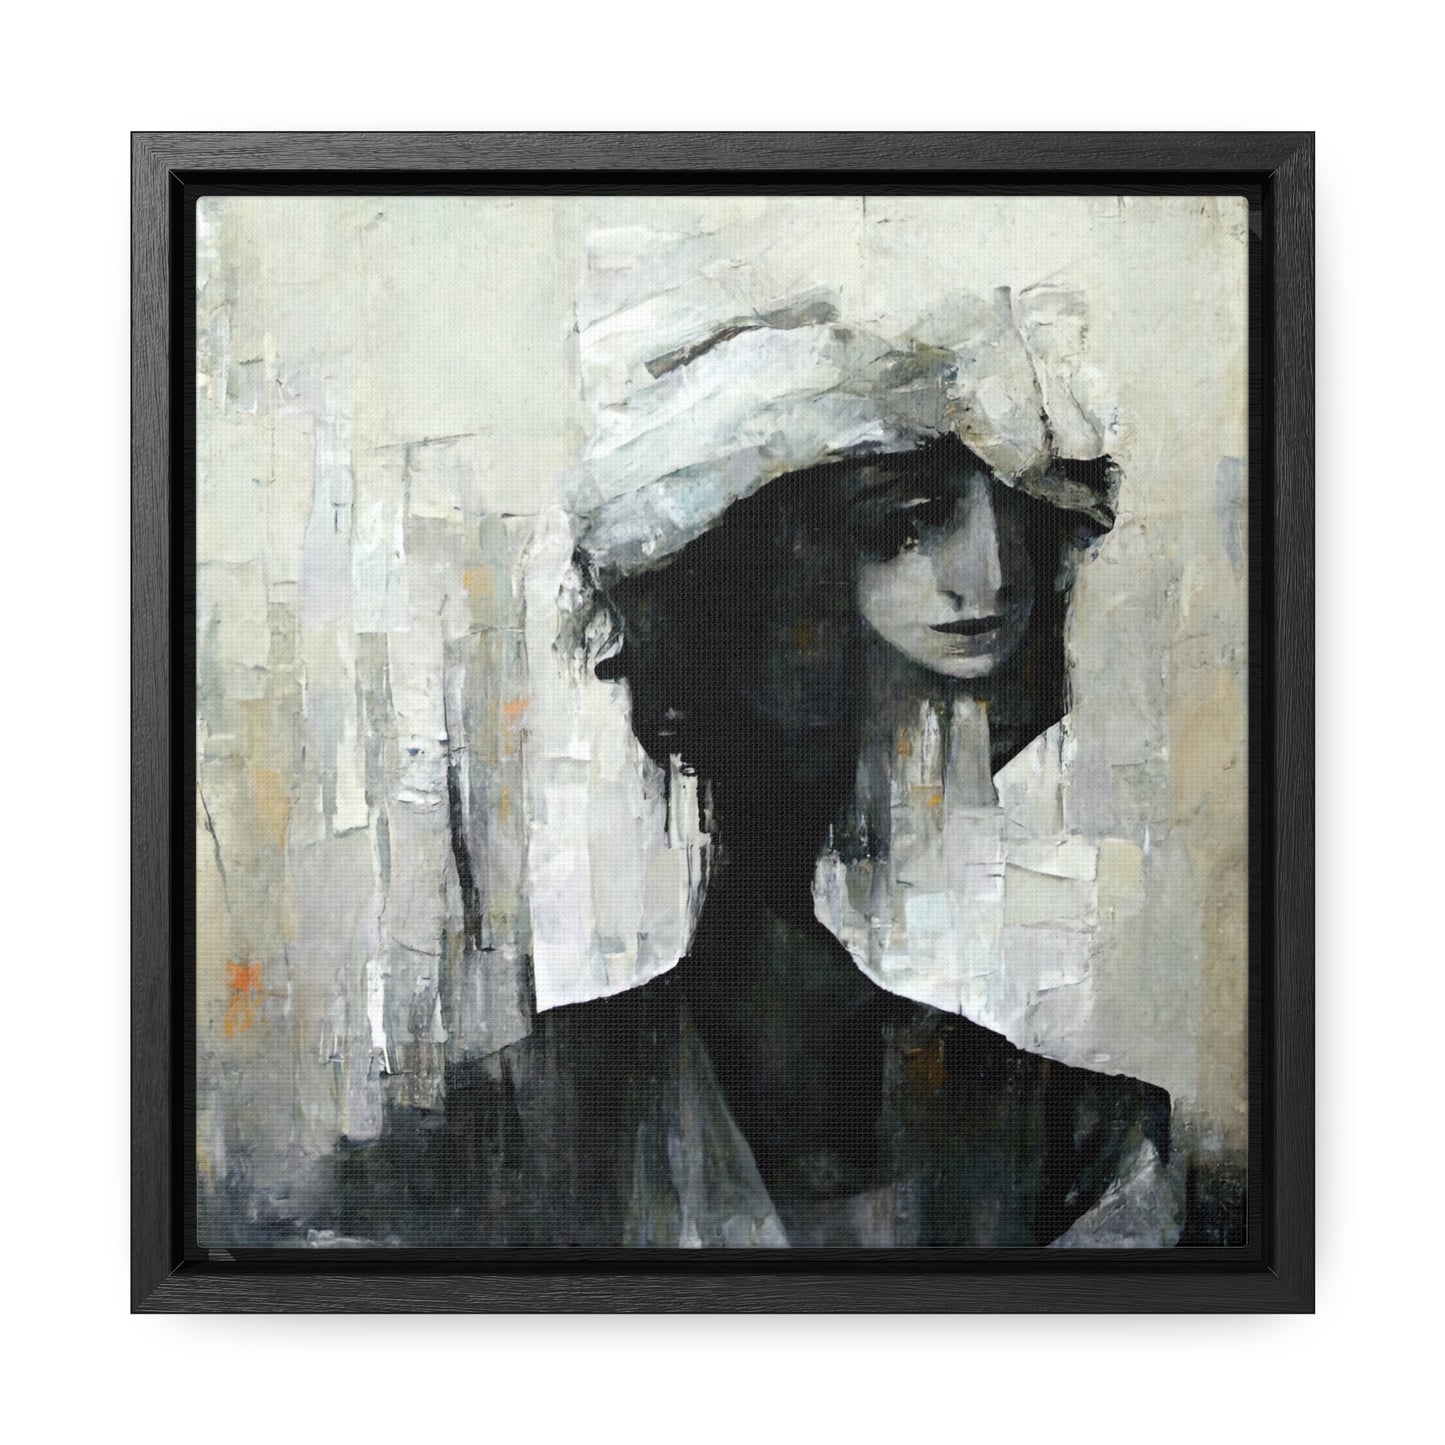 Forgotten Face 6, Valentinii, Gallery Canvas Wraps, Square Frame